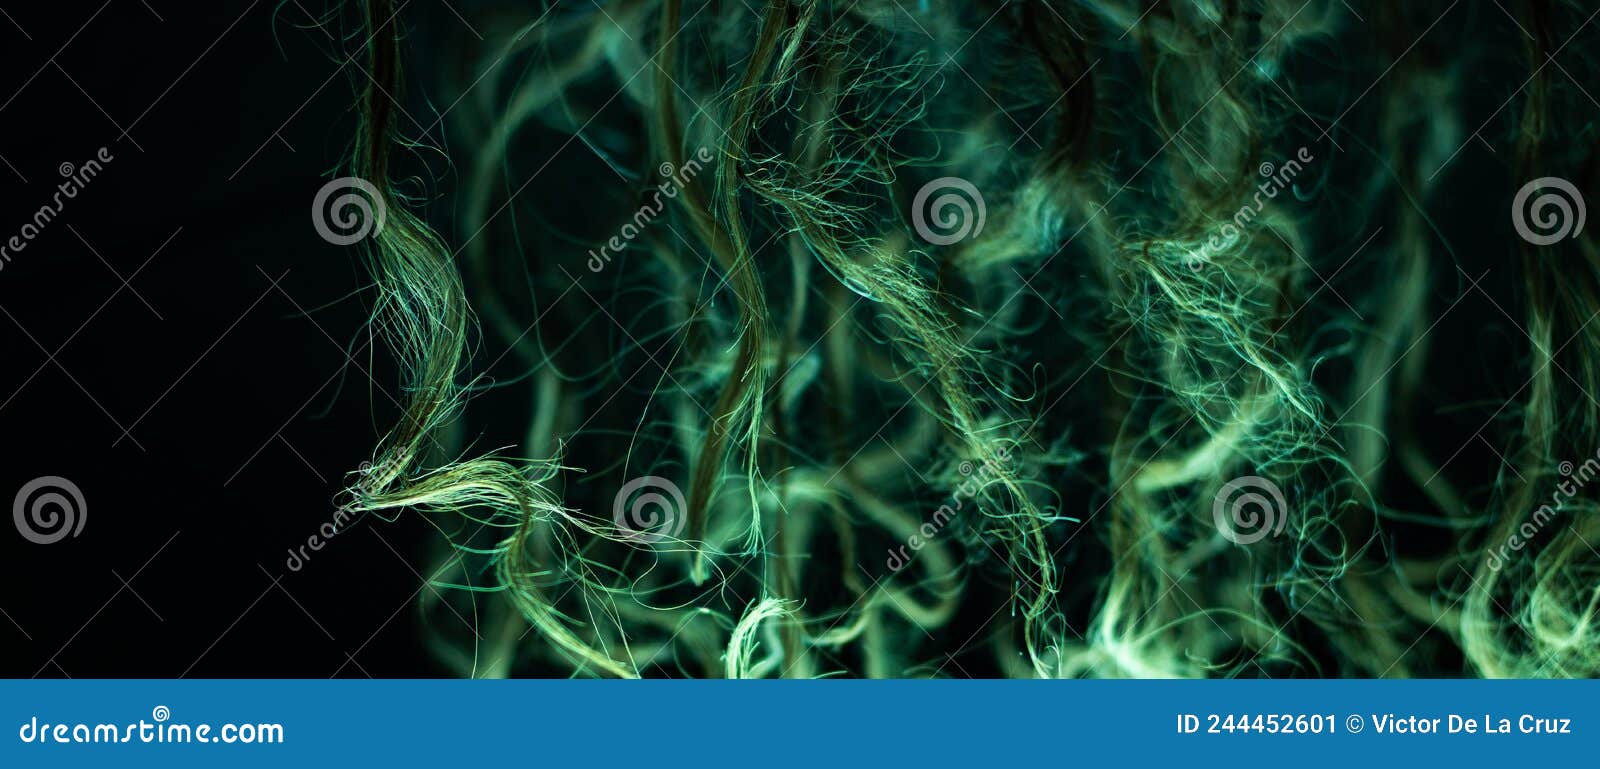 session abstract with hair in caos concept in green light